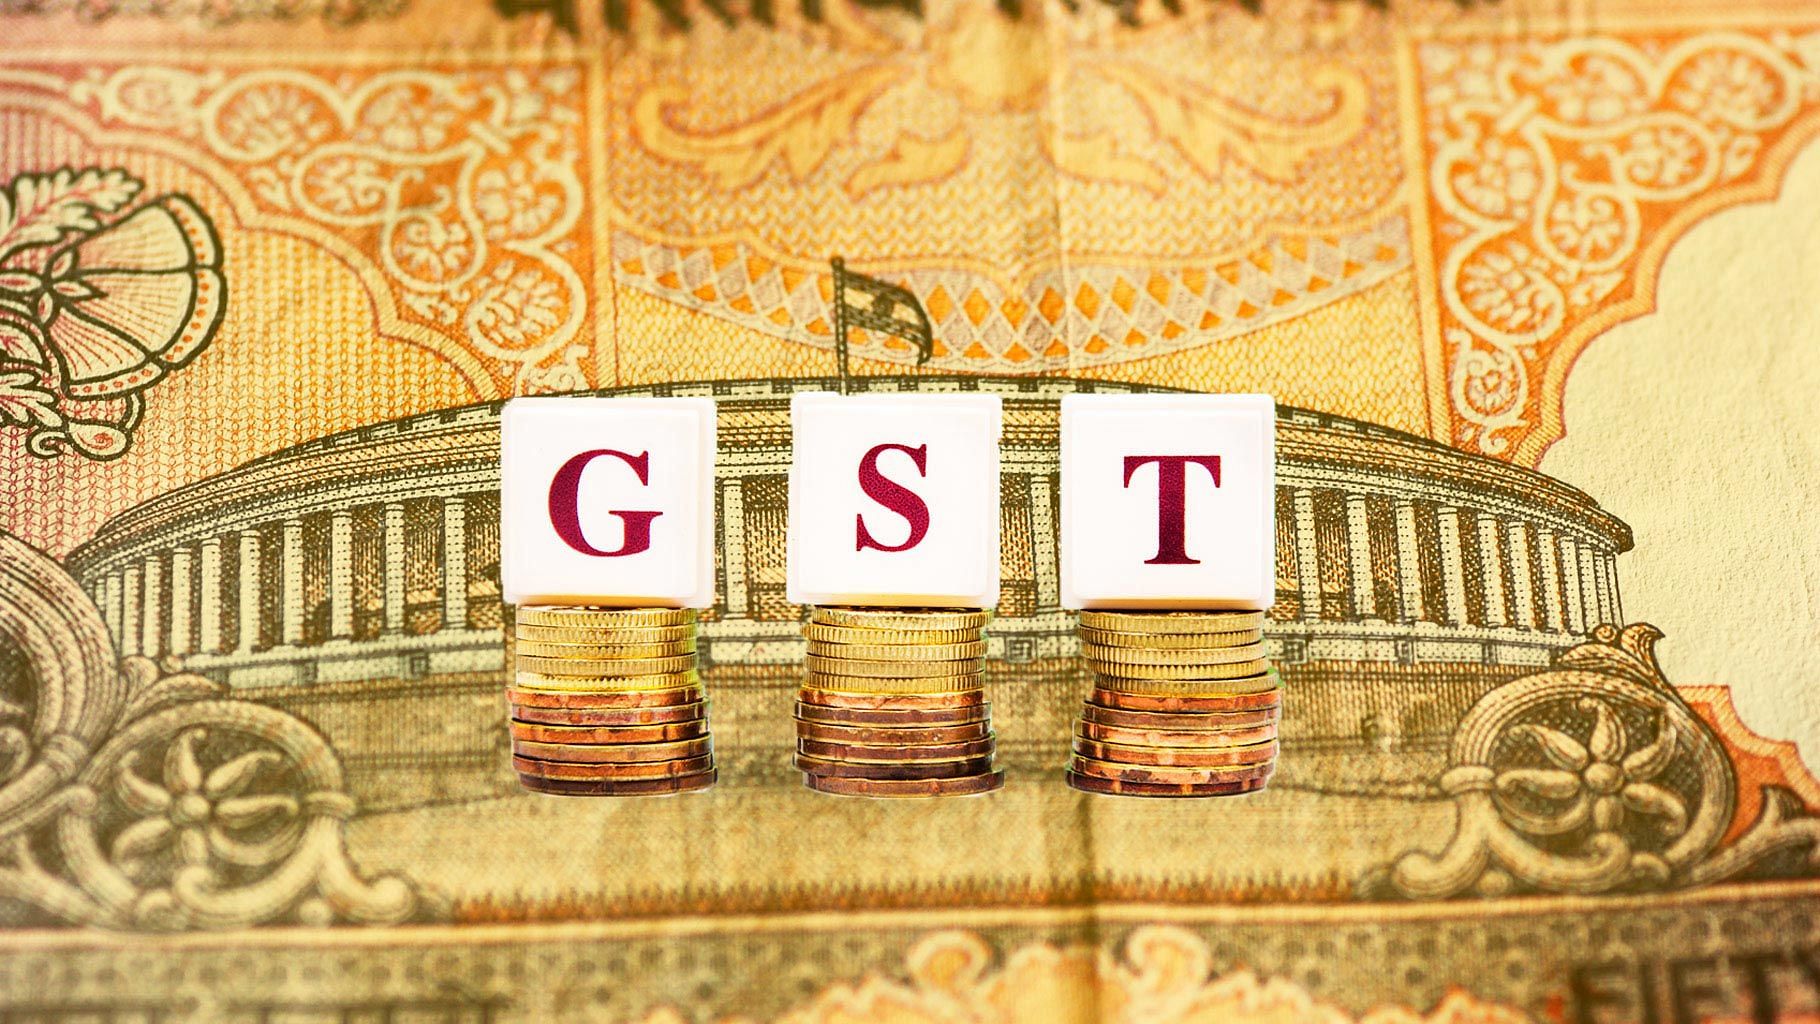 The Goods and Services Tax (GST) collections for the month of December touched a record high of over Rs 1.15 lakh crore.